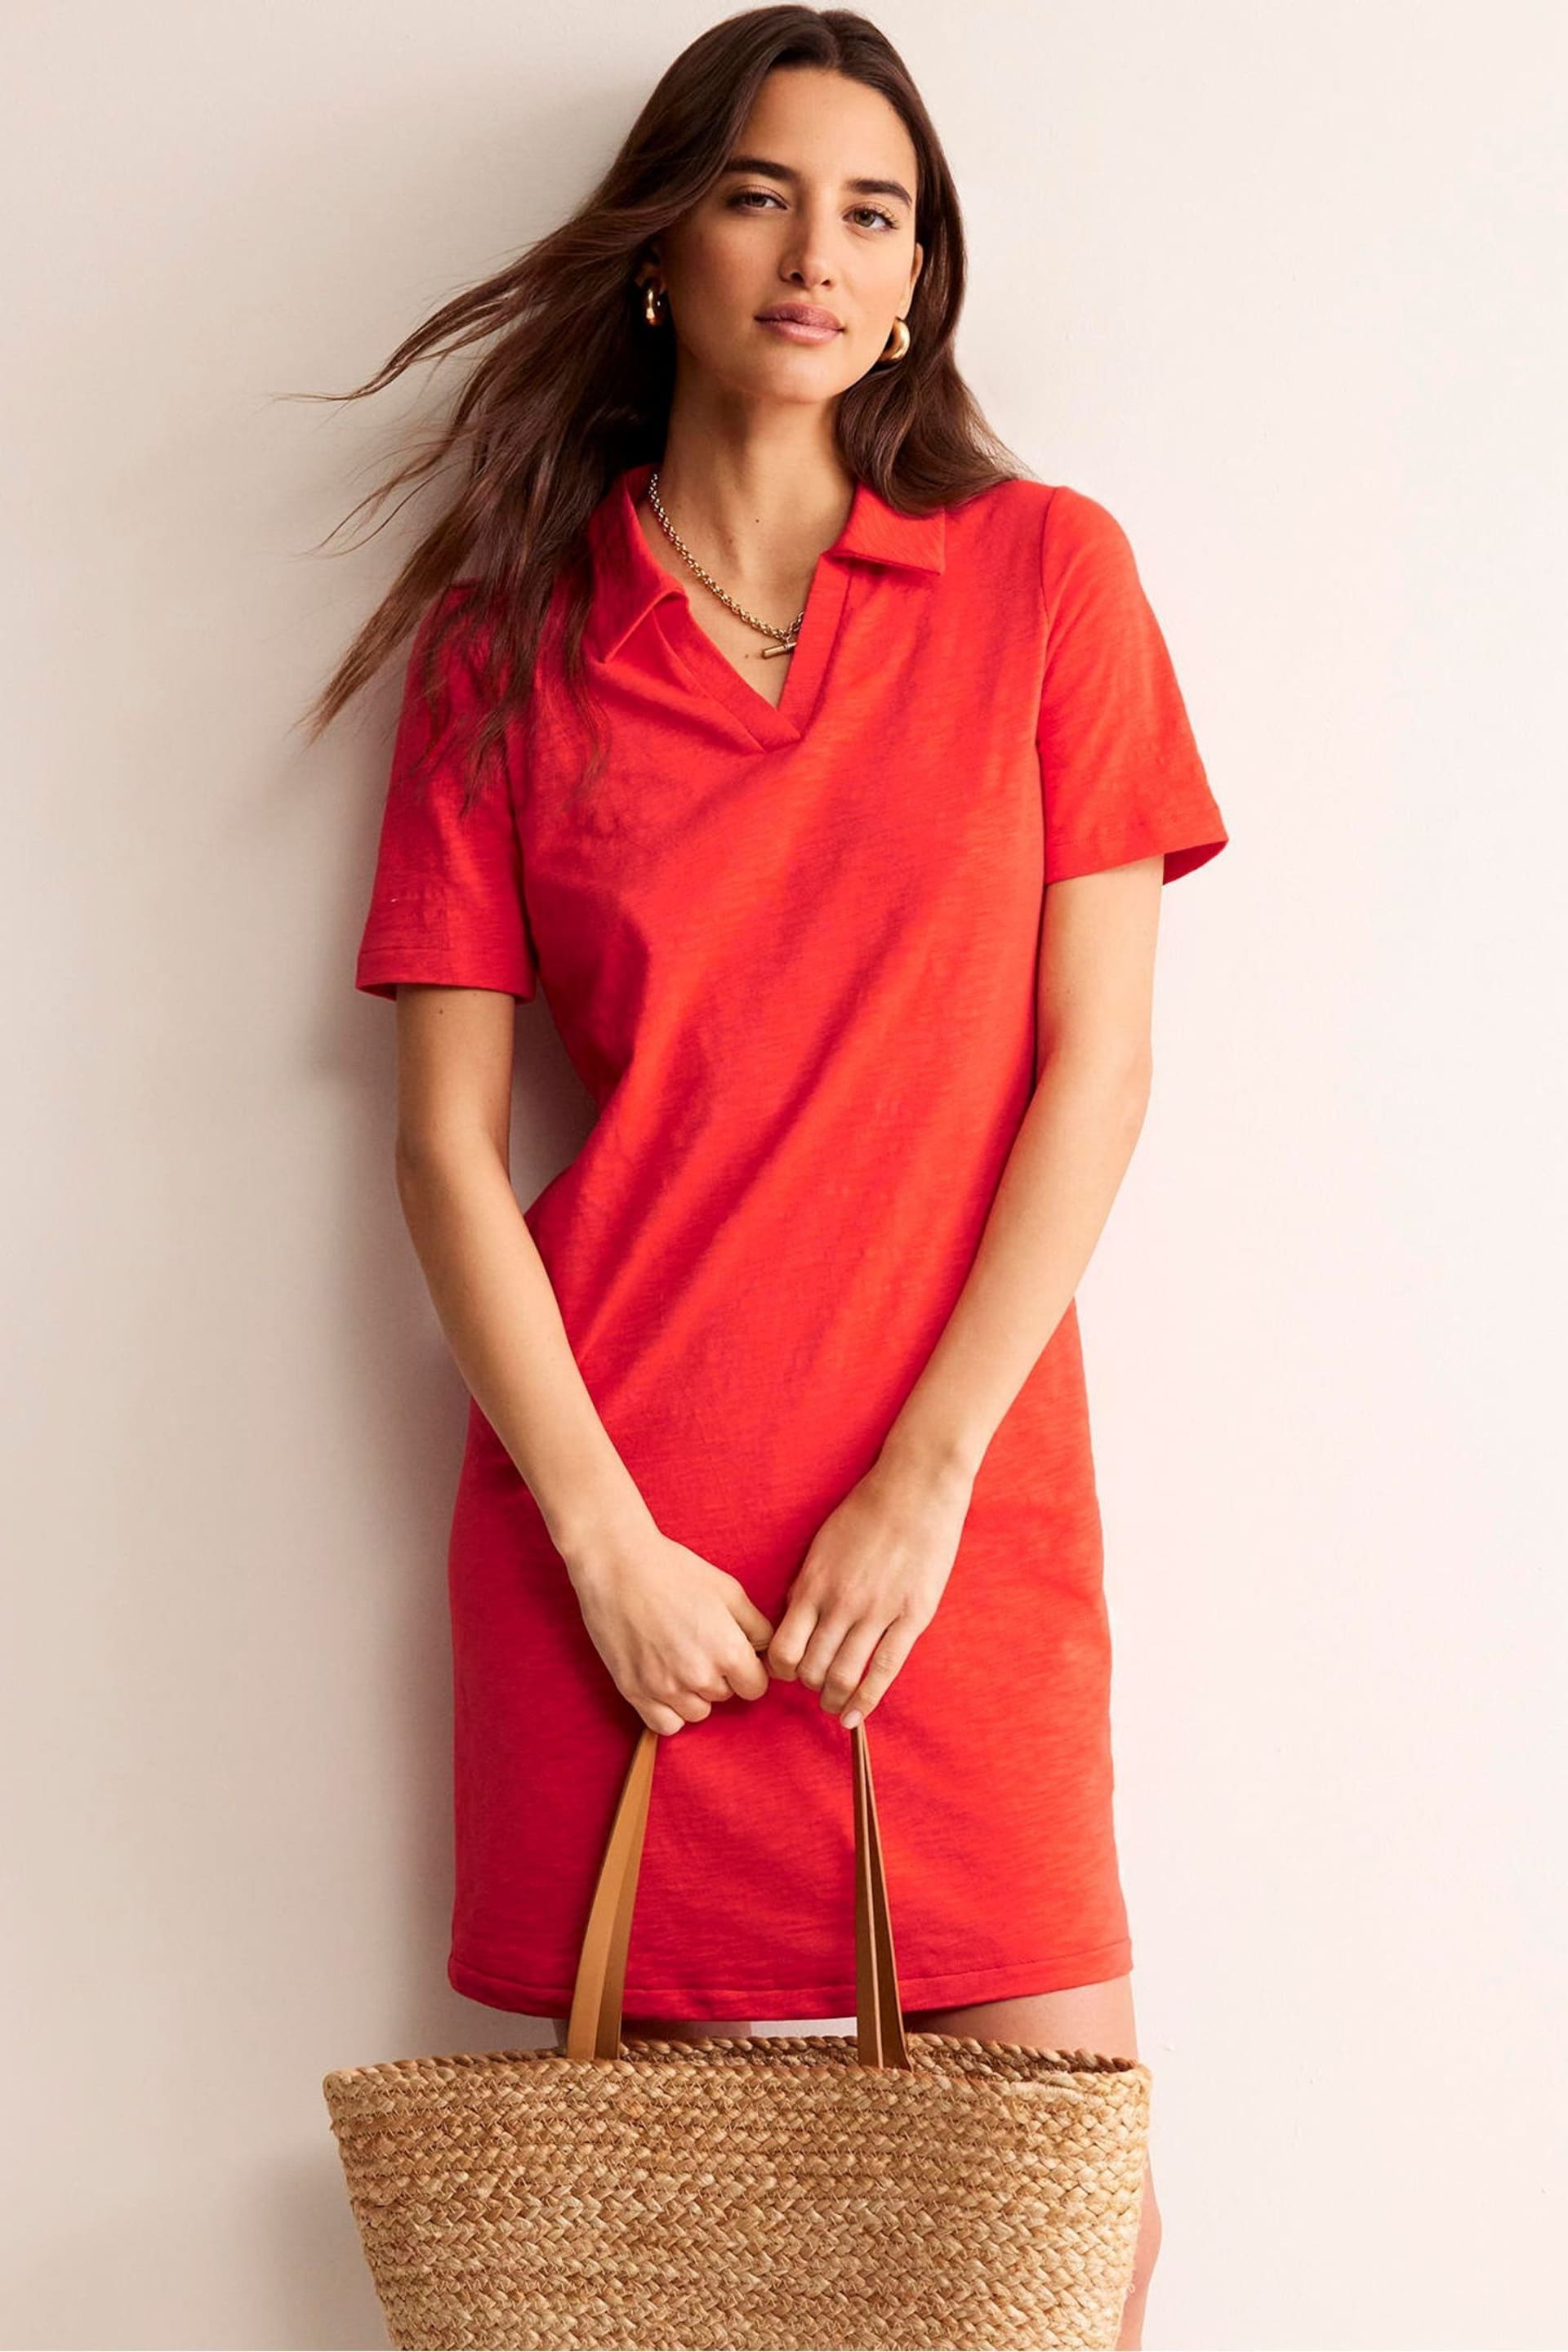 Boden Red Ingrid Polo Cotton Dress - Image 4 of 5